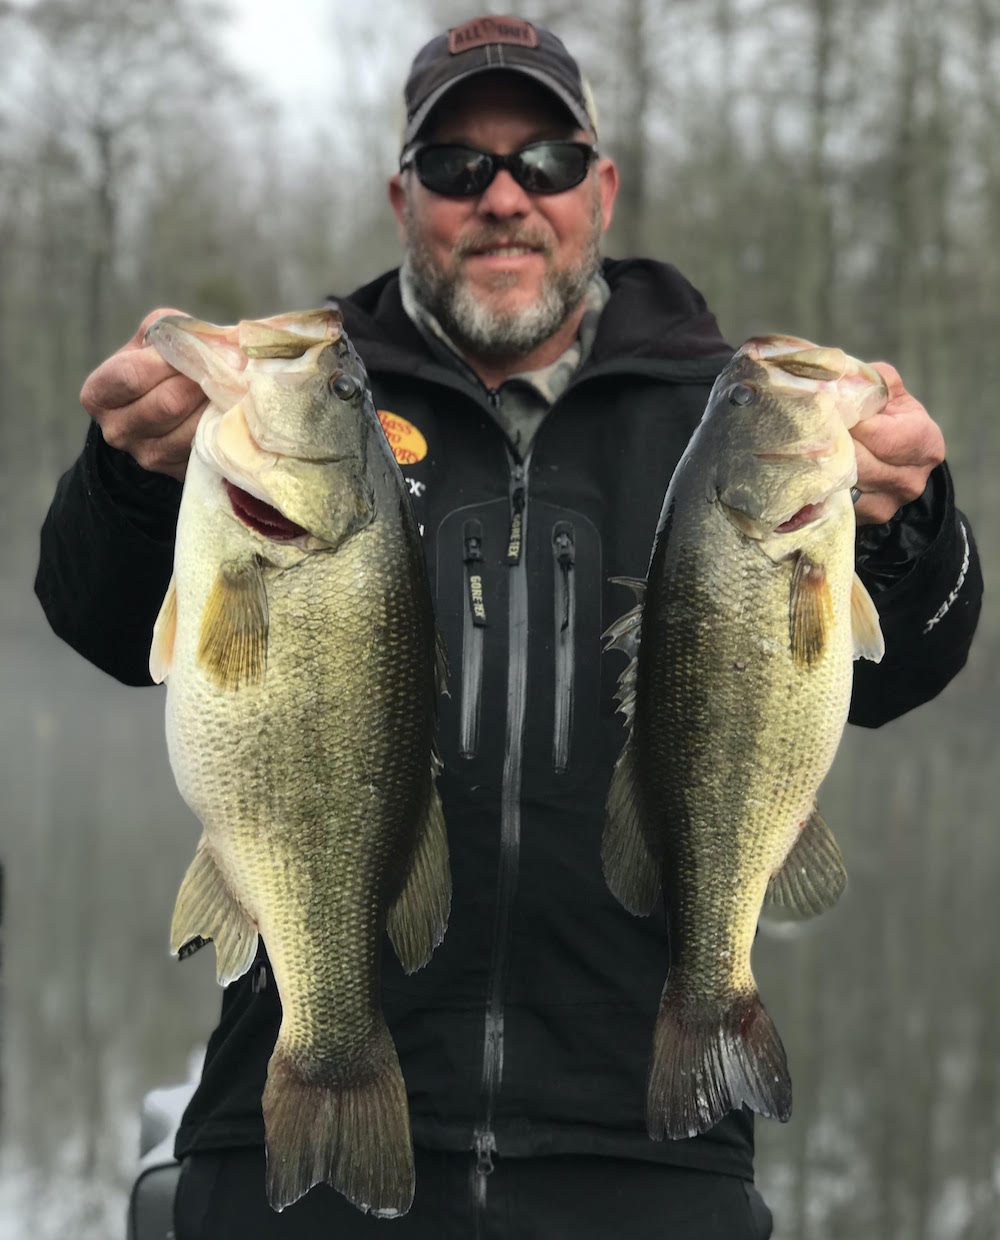 February Lower Roanoke River/Albermarle Sound Lake Report by Capt. Scooter Lilley